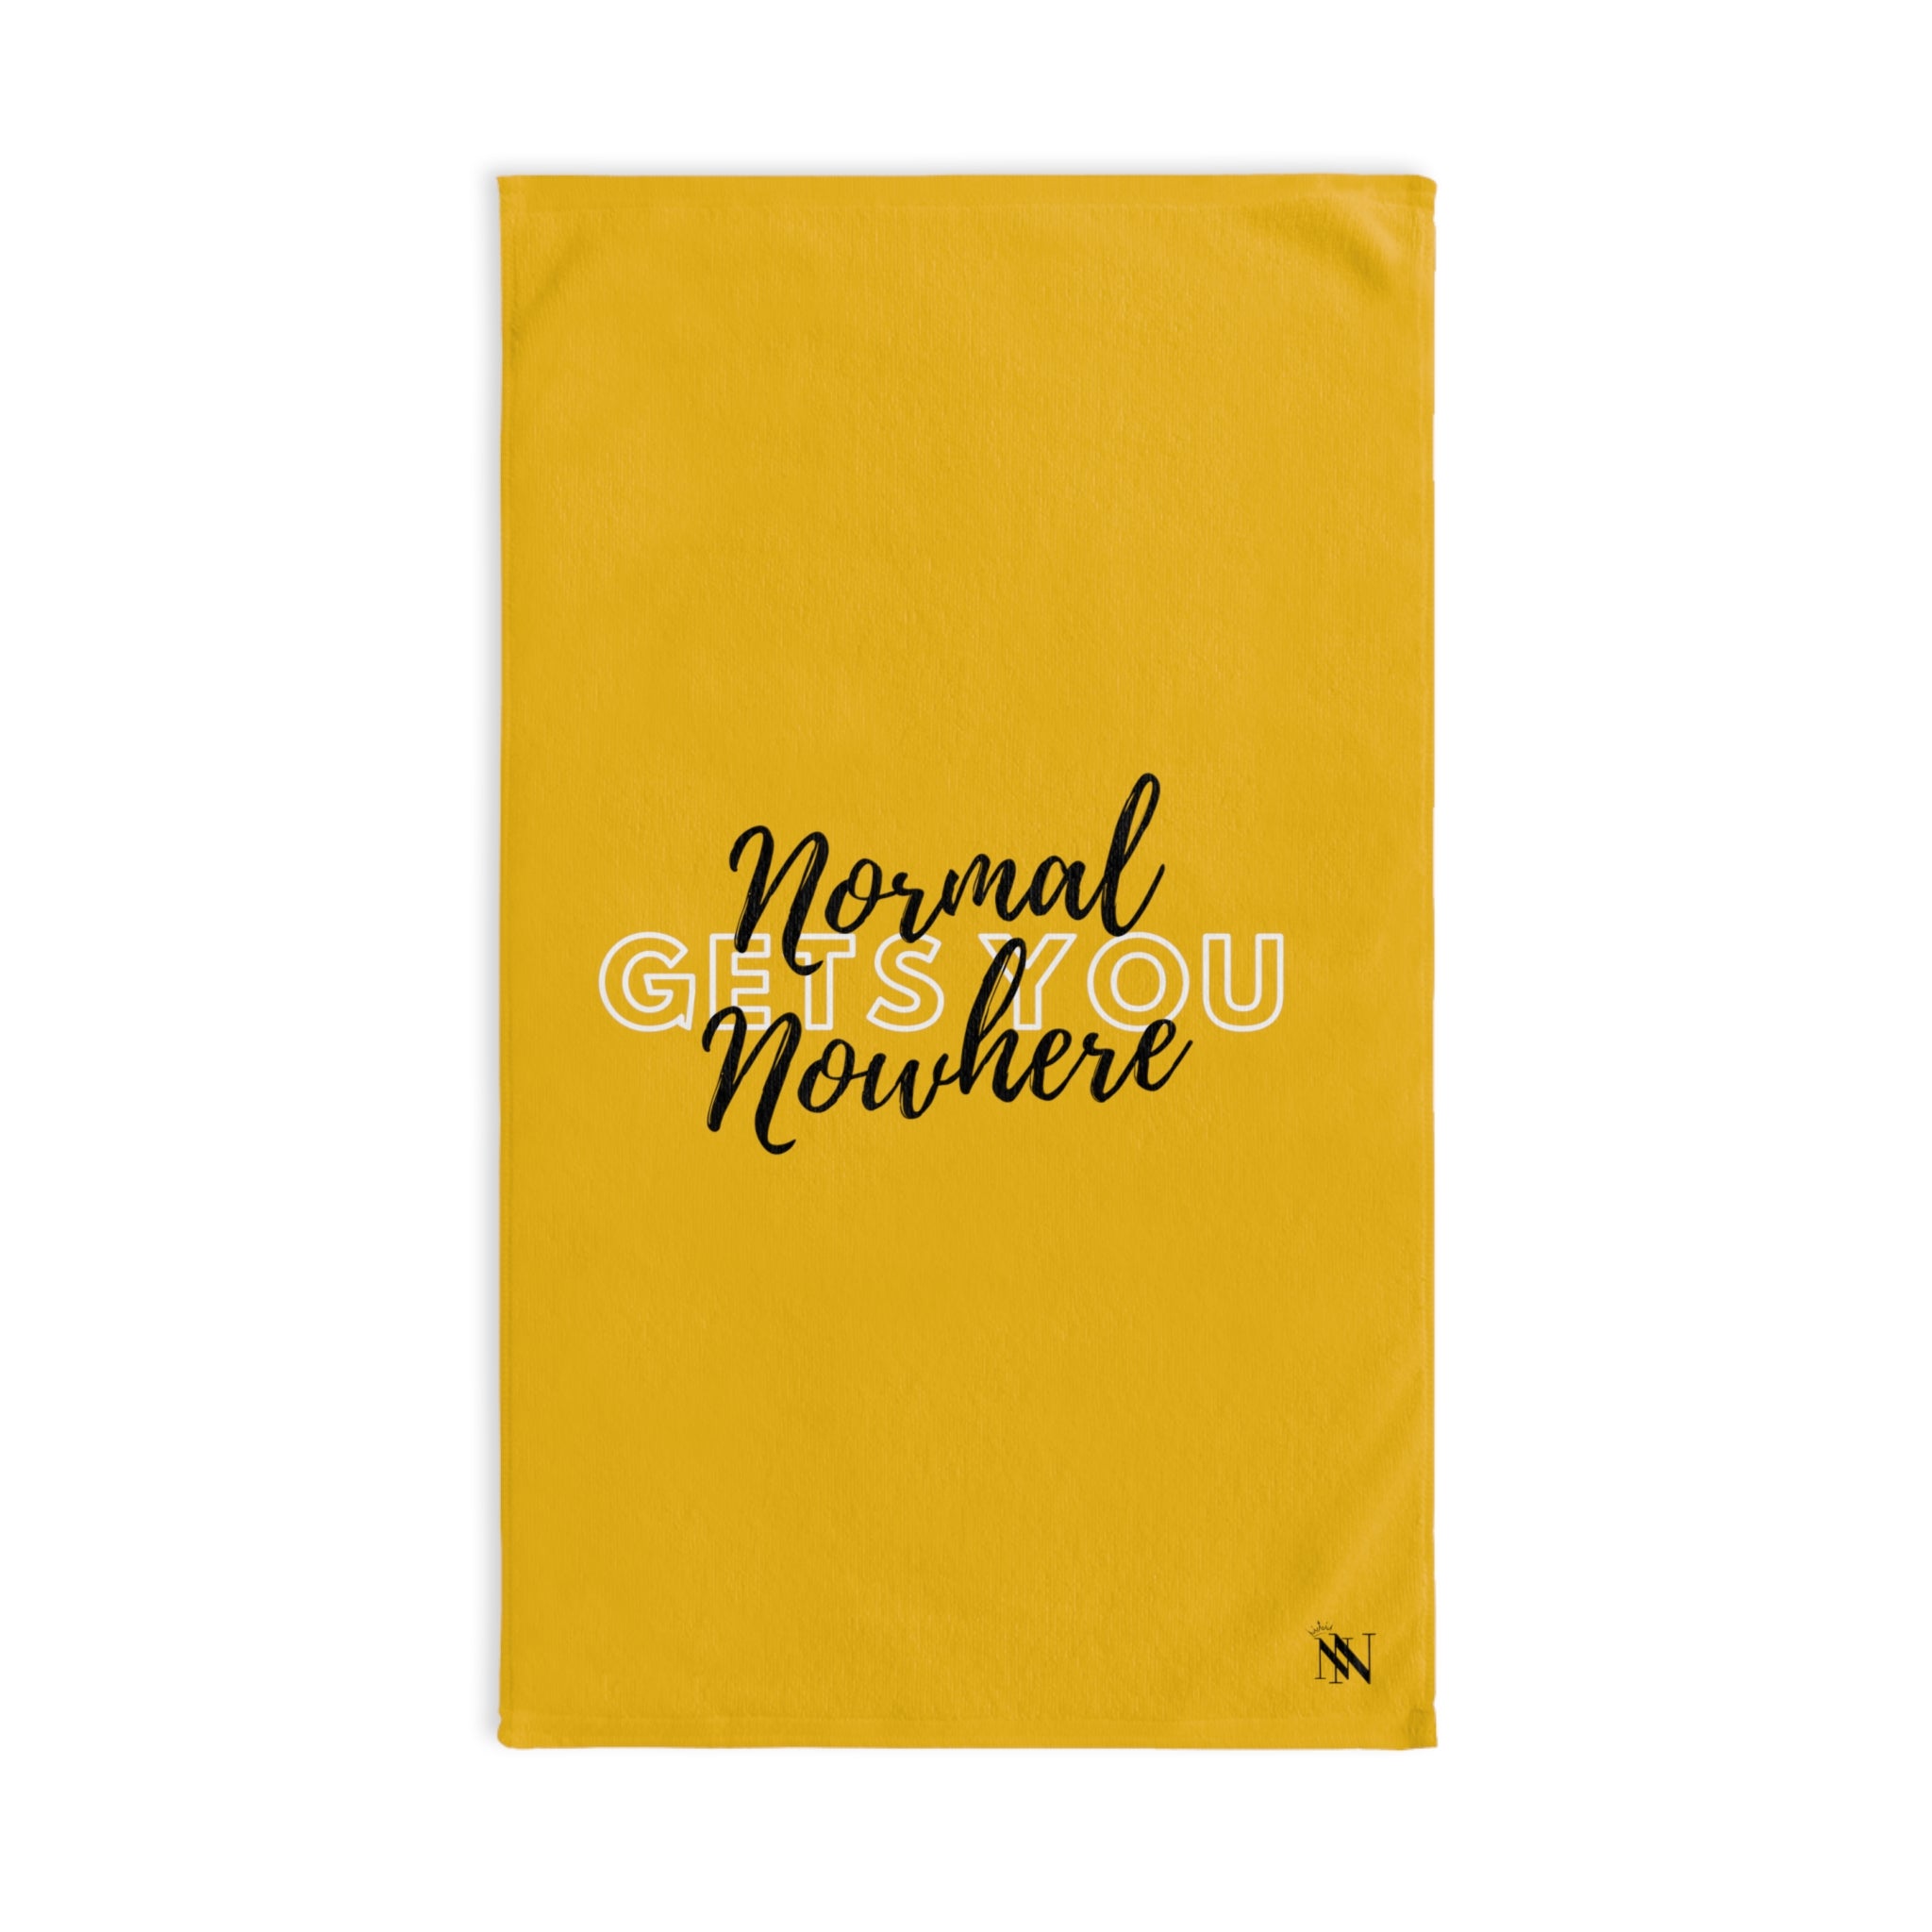 Normal Nowhere Yellow | Funny Gifts for Men - Gifts for Him - Birthday Gifts for Men, Him, Husband, Boyfriend, New Couple Gifts, Fathers & Valentines Day Gifts, Christmas Gifts NECTAR NAPKINS